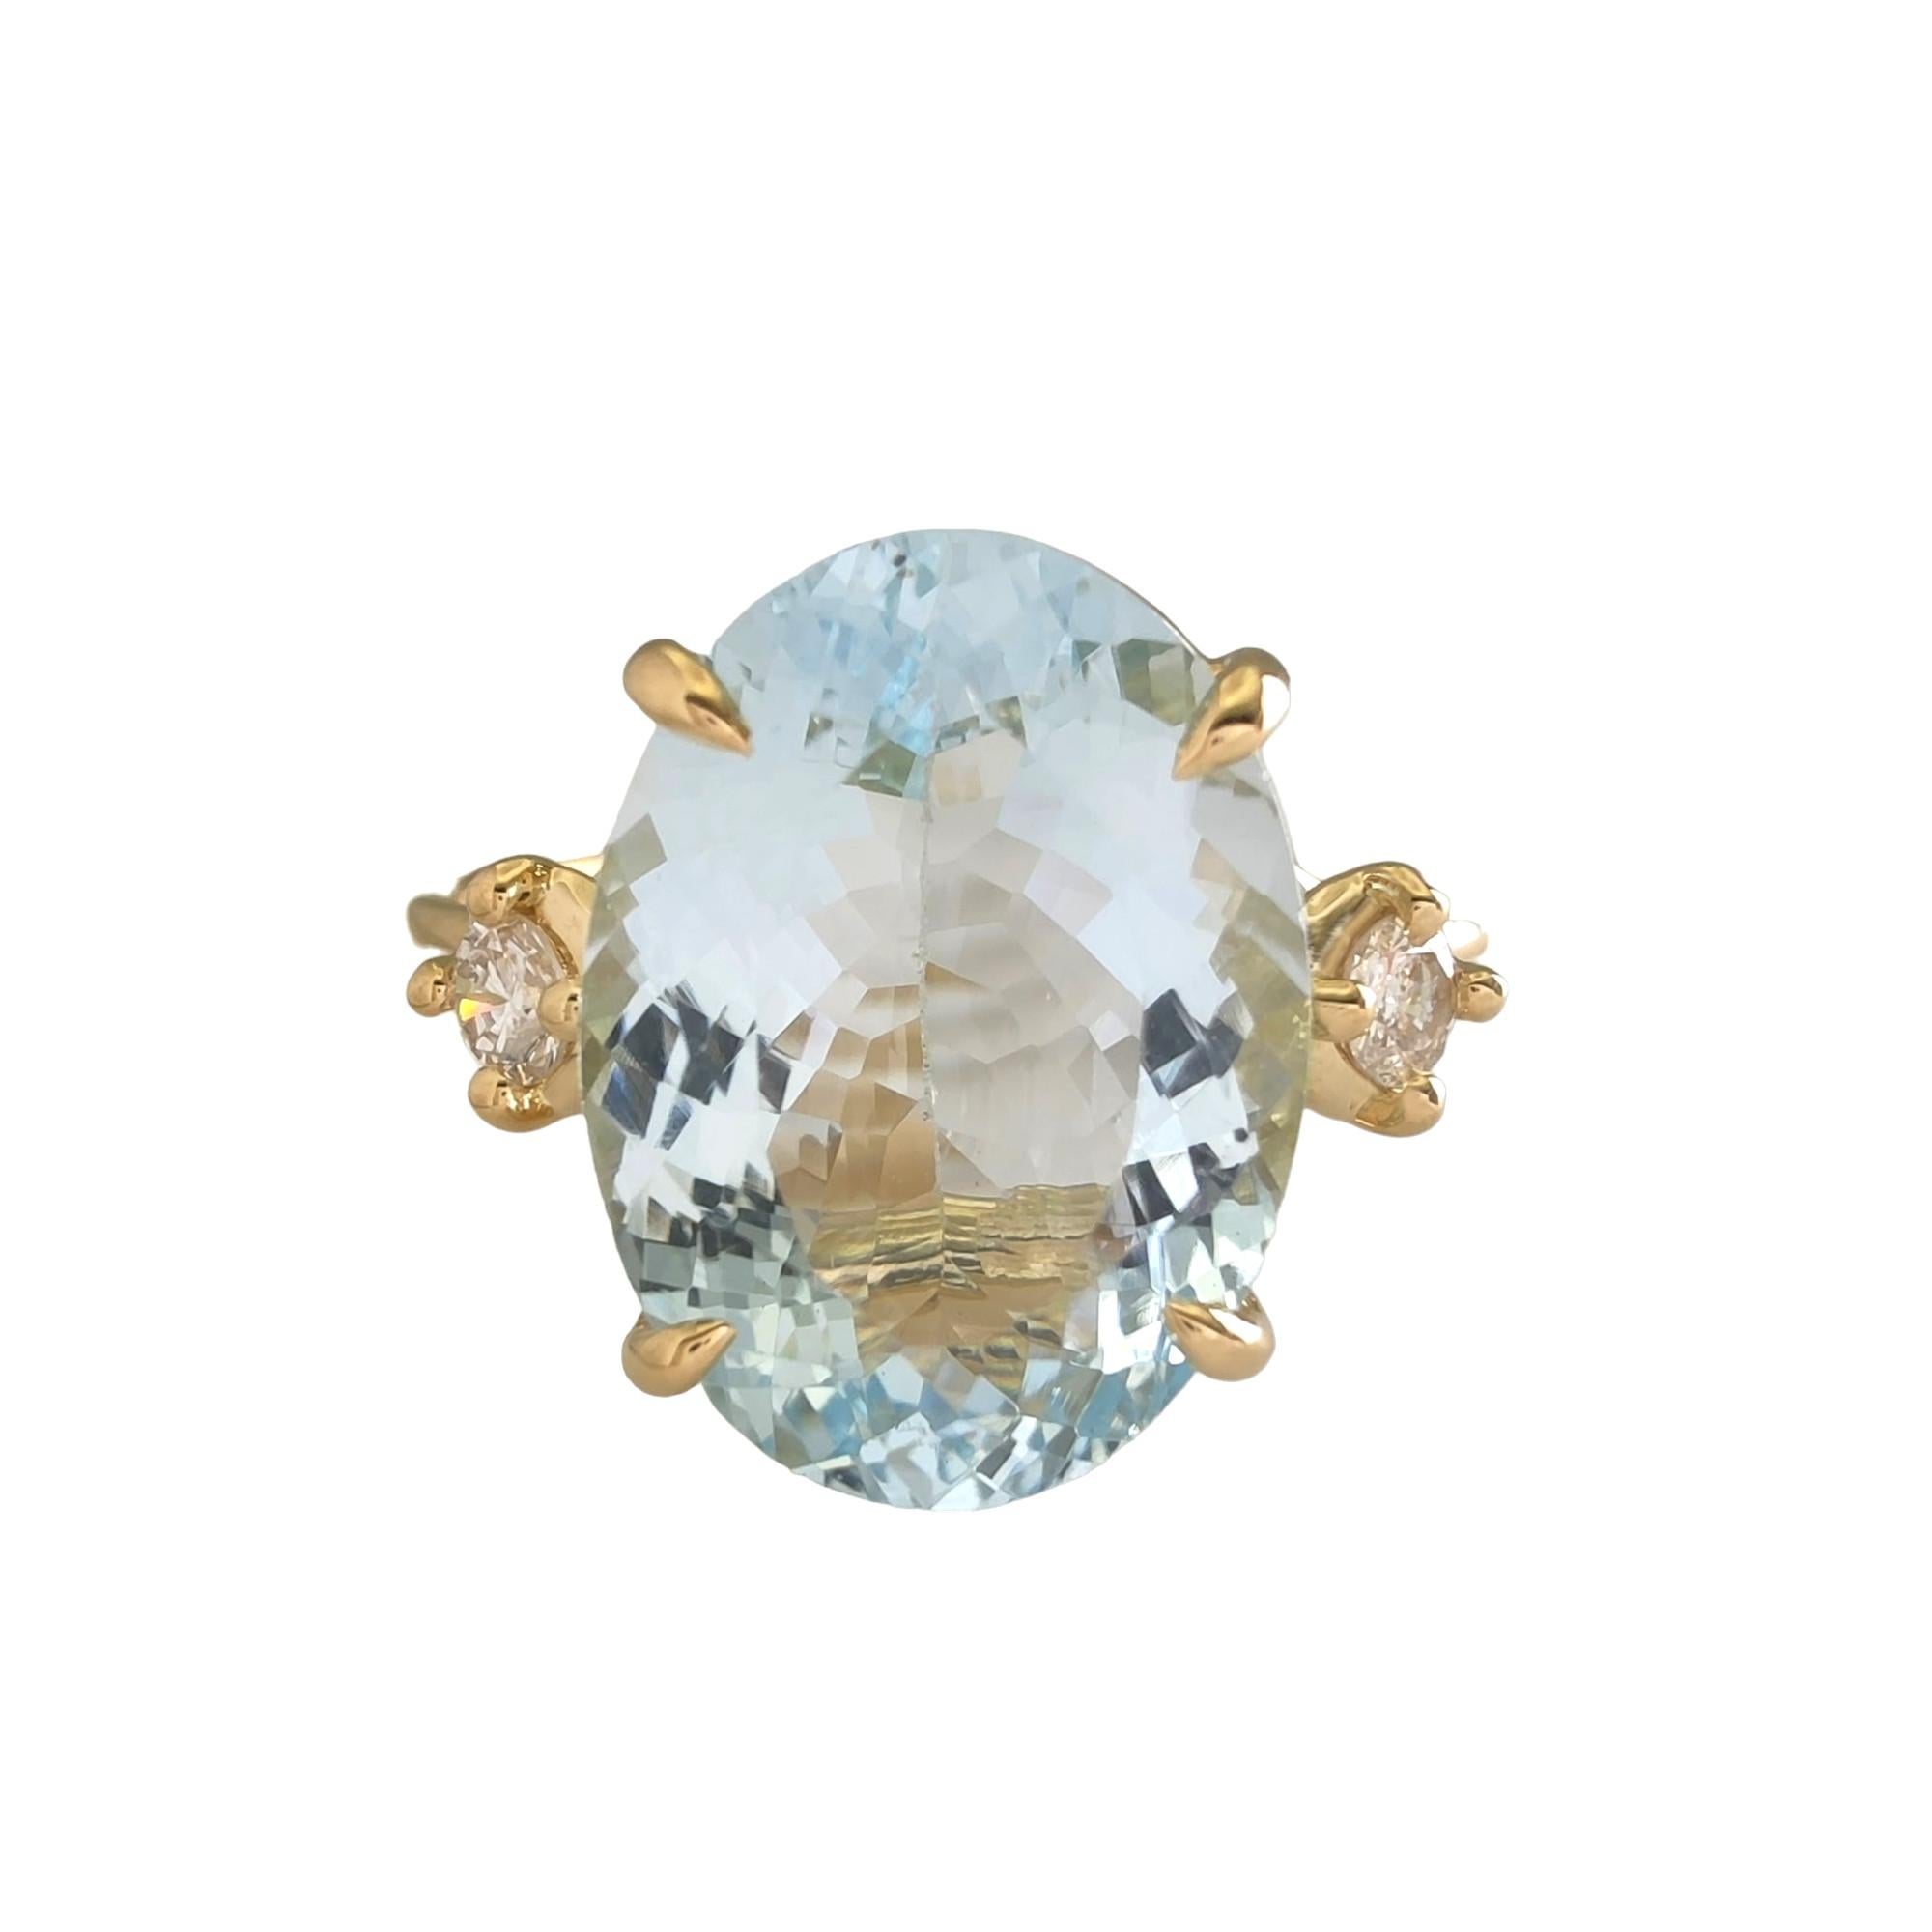 3, 93ct Oval Cut Aquamarine Engagement Ring, 18k Yellow Gold - Resizable For Sale 4